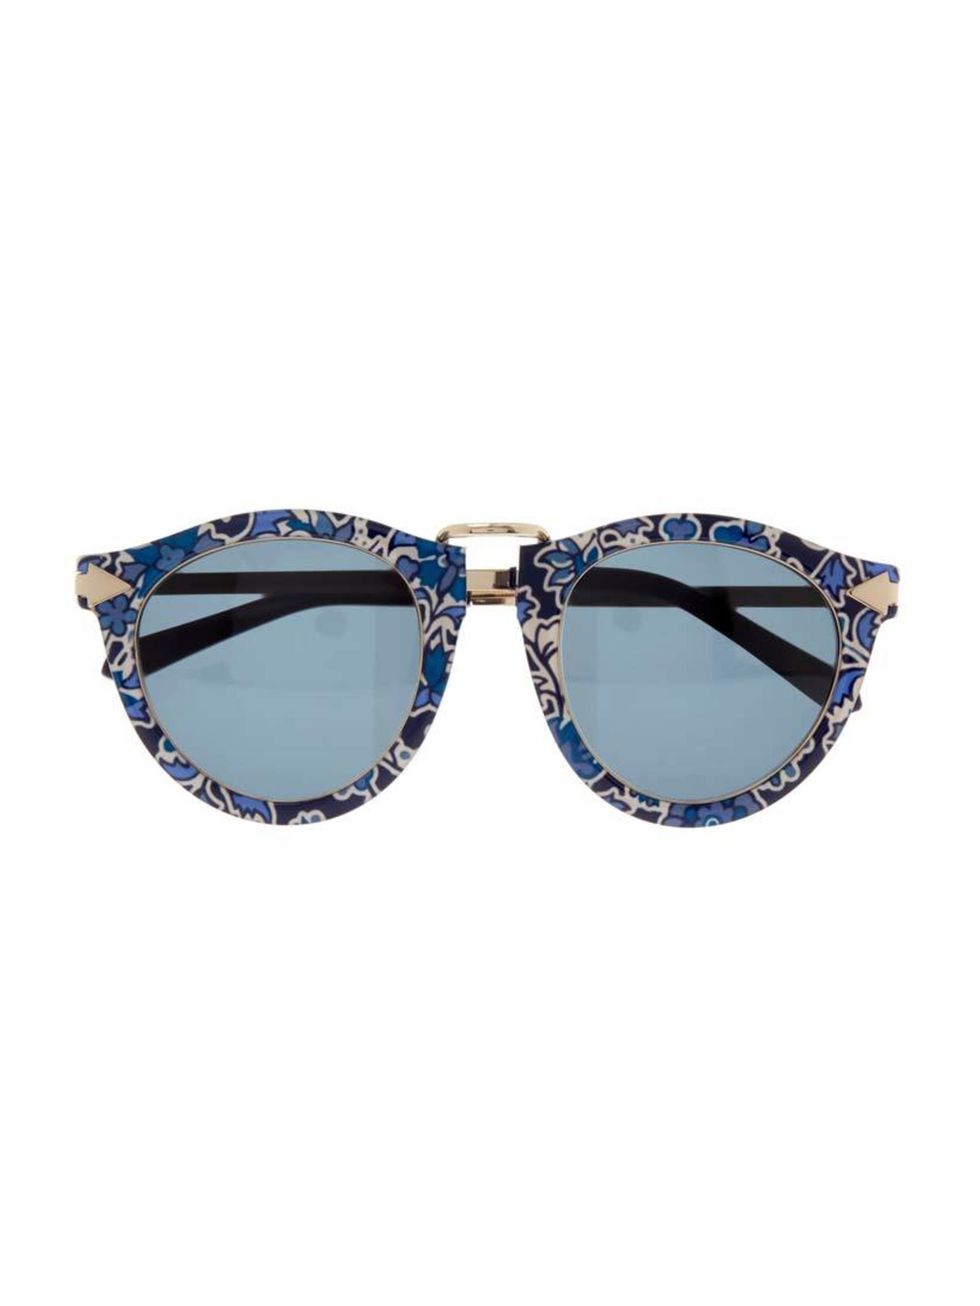 <p>A masculine shape reworked in Liberty's signature floral print.</p>

<p><a href="http://www.liberty.co.uk/fcp/product/Liberty//Blue-Liberty-Print-Harvest-Sunglasses/123060" target="_blank">Karen Walker x Liberty</a> sunglasses, £210</p>